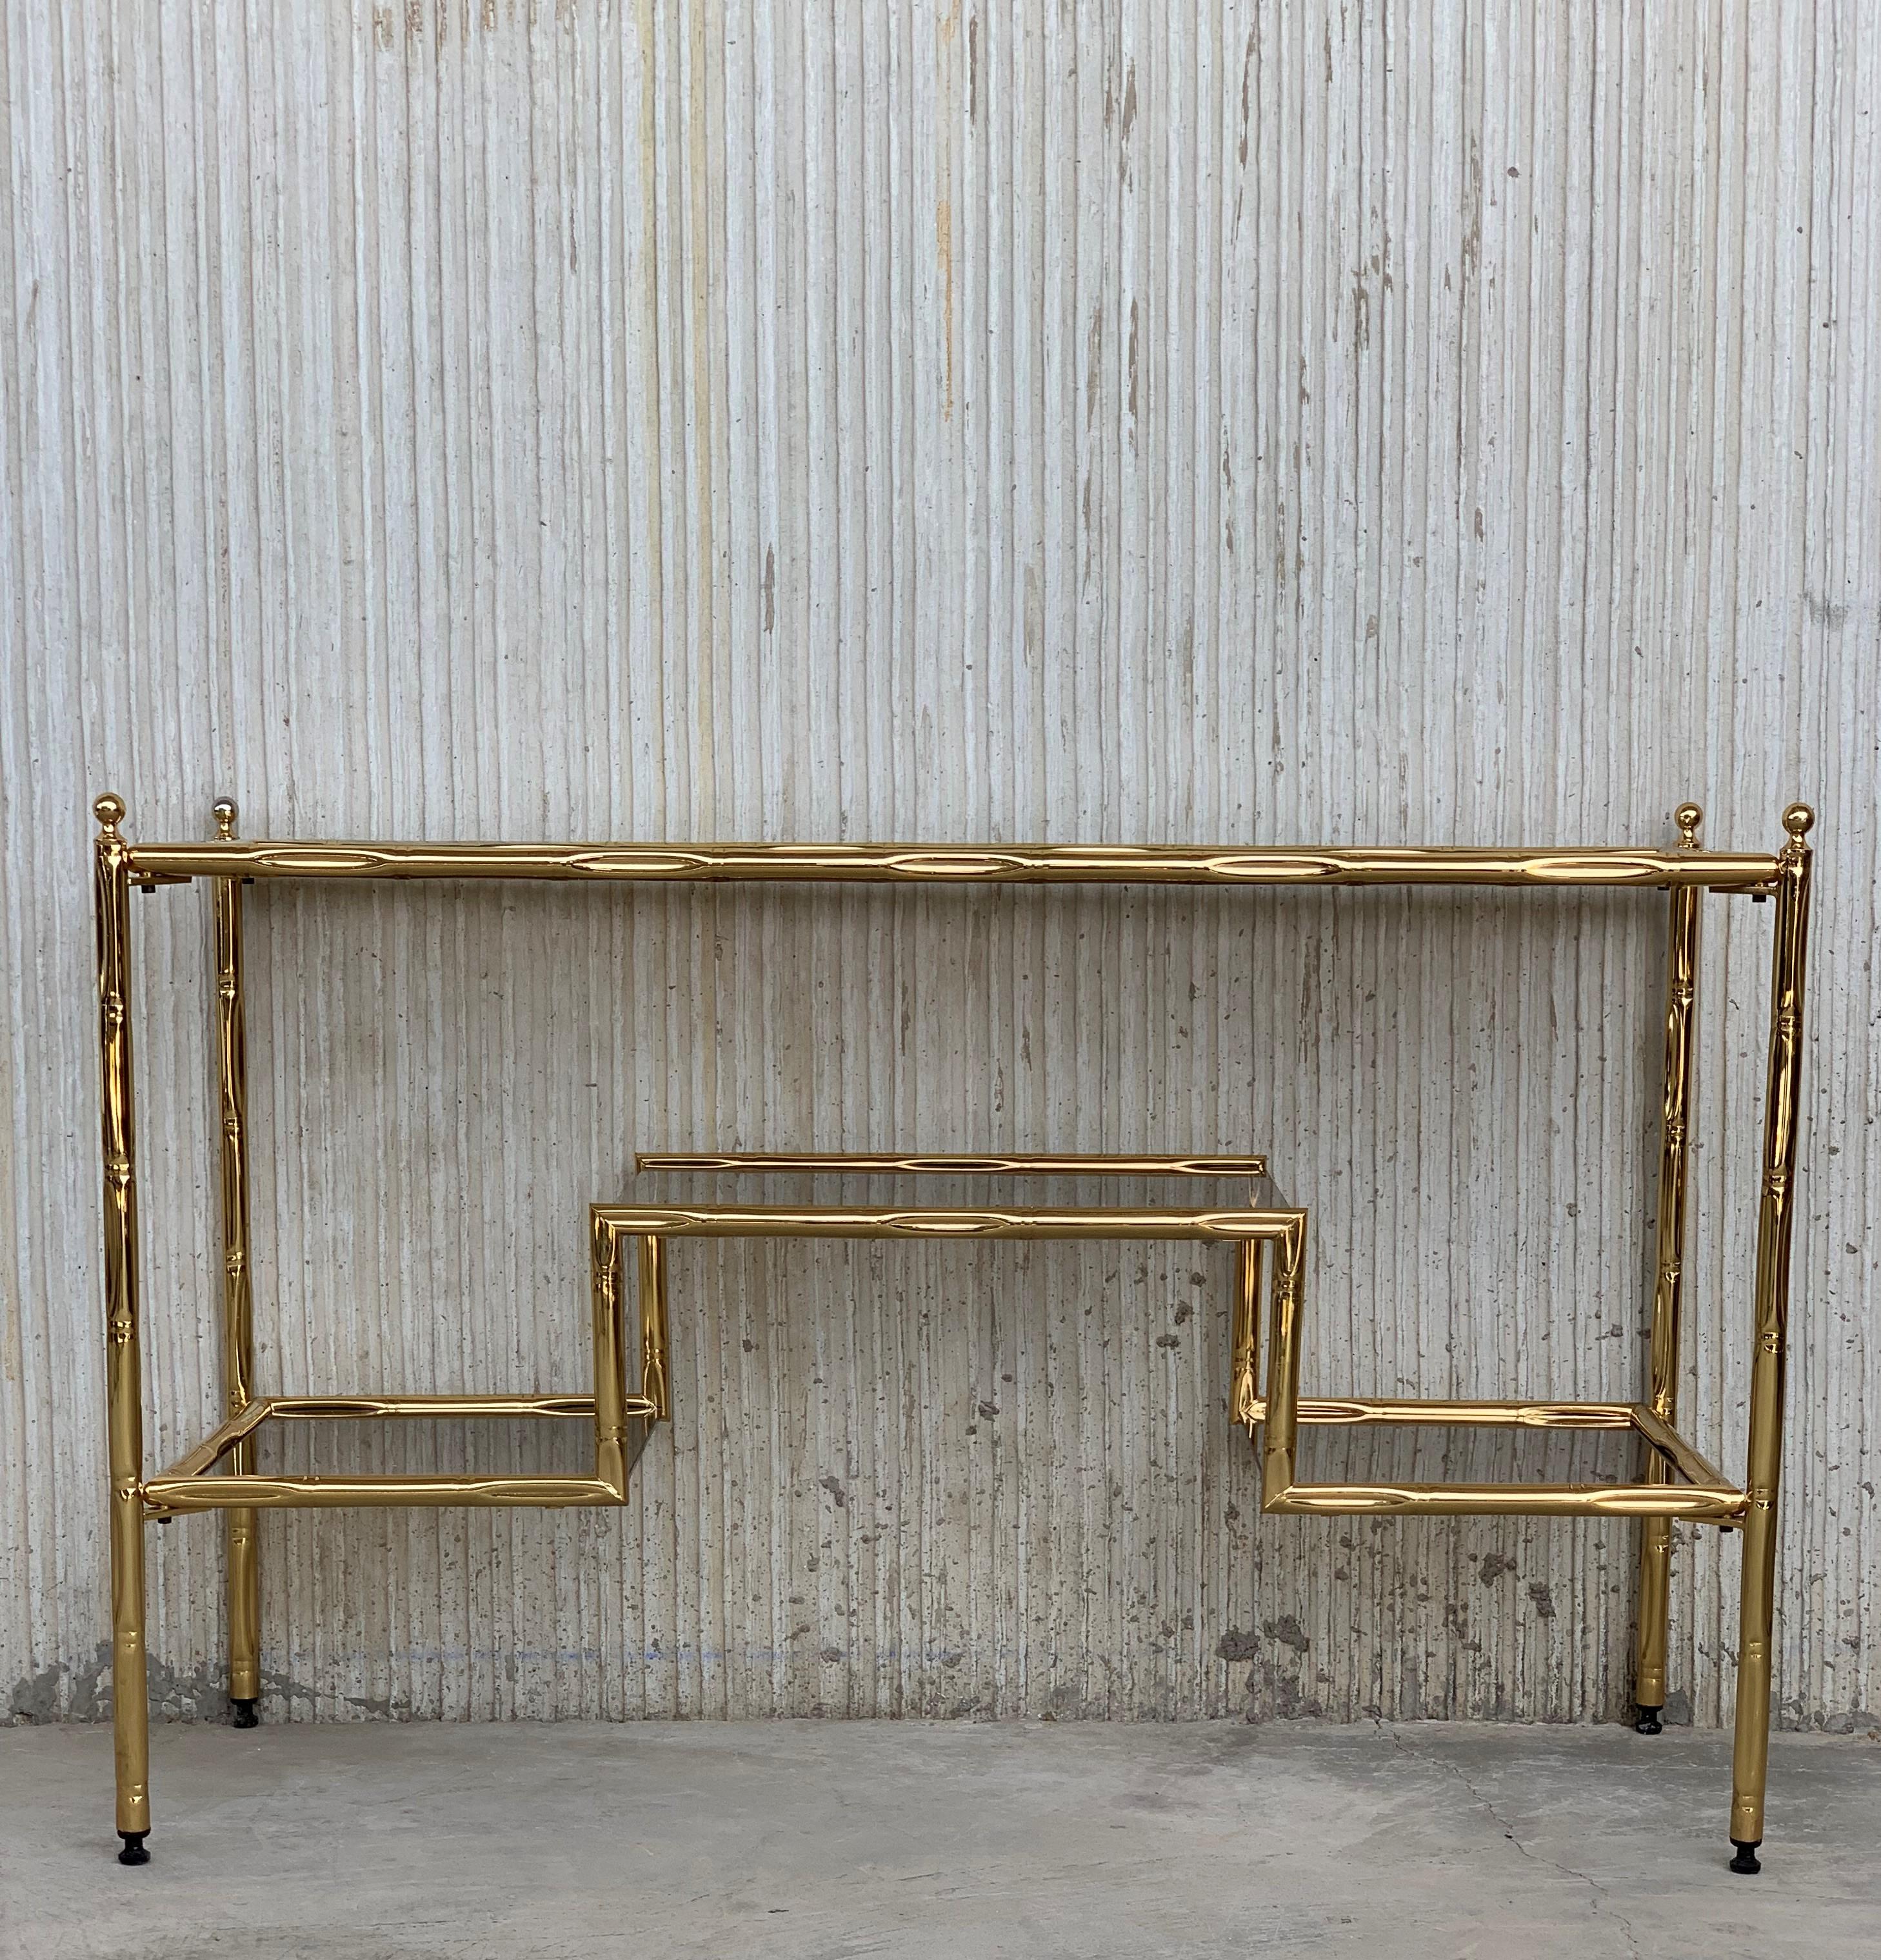 Mid-Century Modern Italian faux bamboo gilt metal console table or vanity with smoked glass.

Measures: Total height: 25.6in
Height to the glass top: 24.80in
Height to the middle glass shelve: 16.14in
Height to the low shelves: 9.45in.